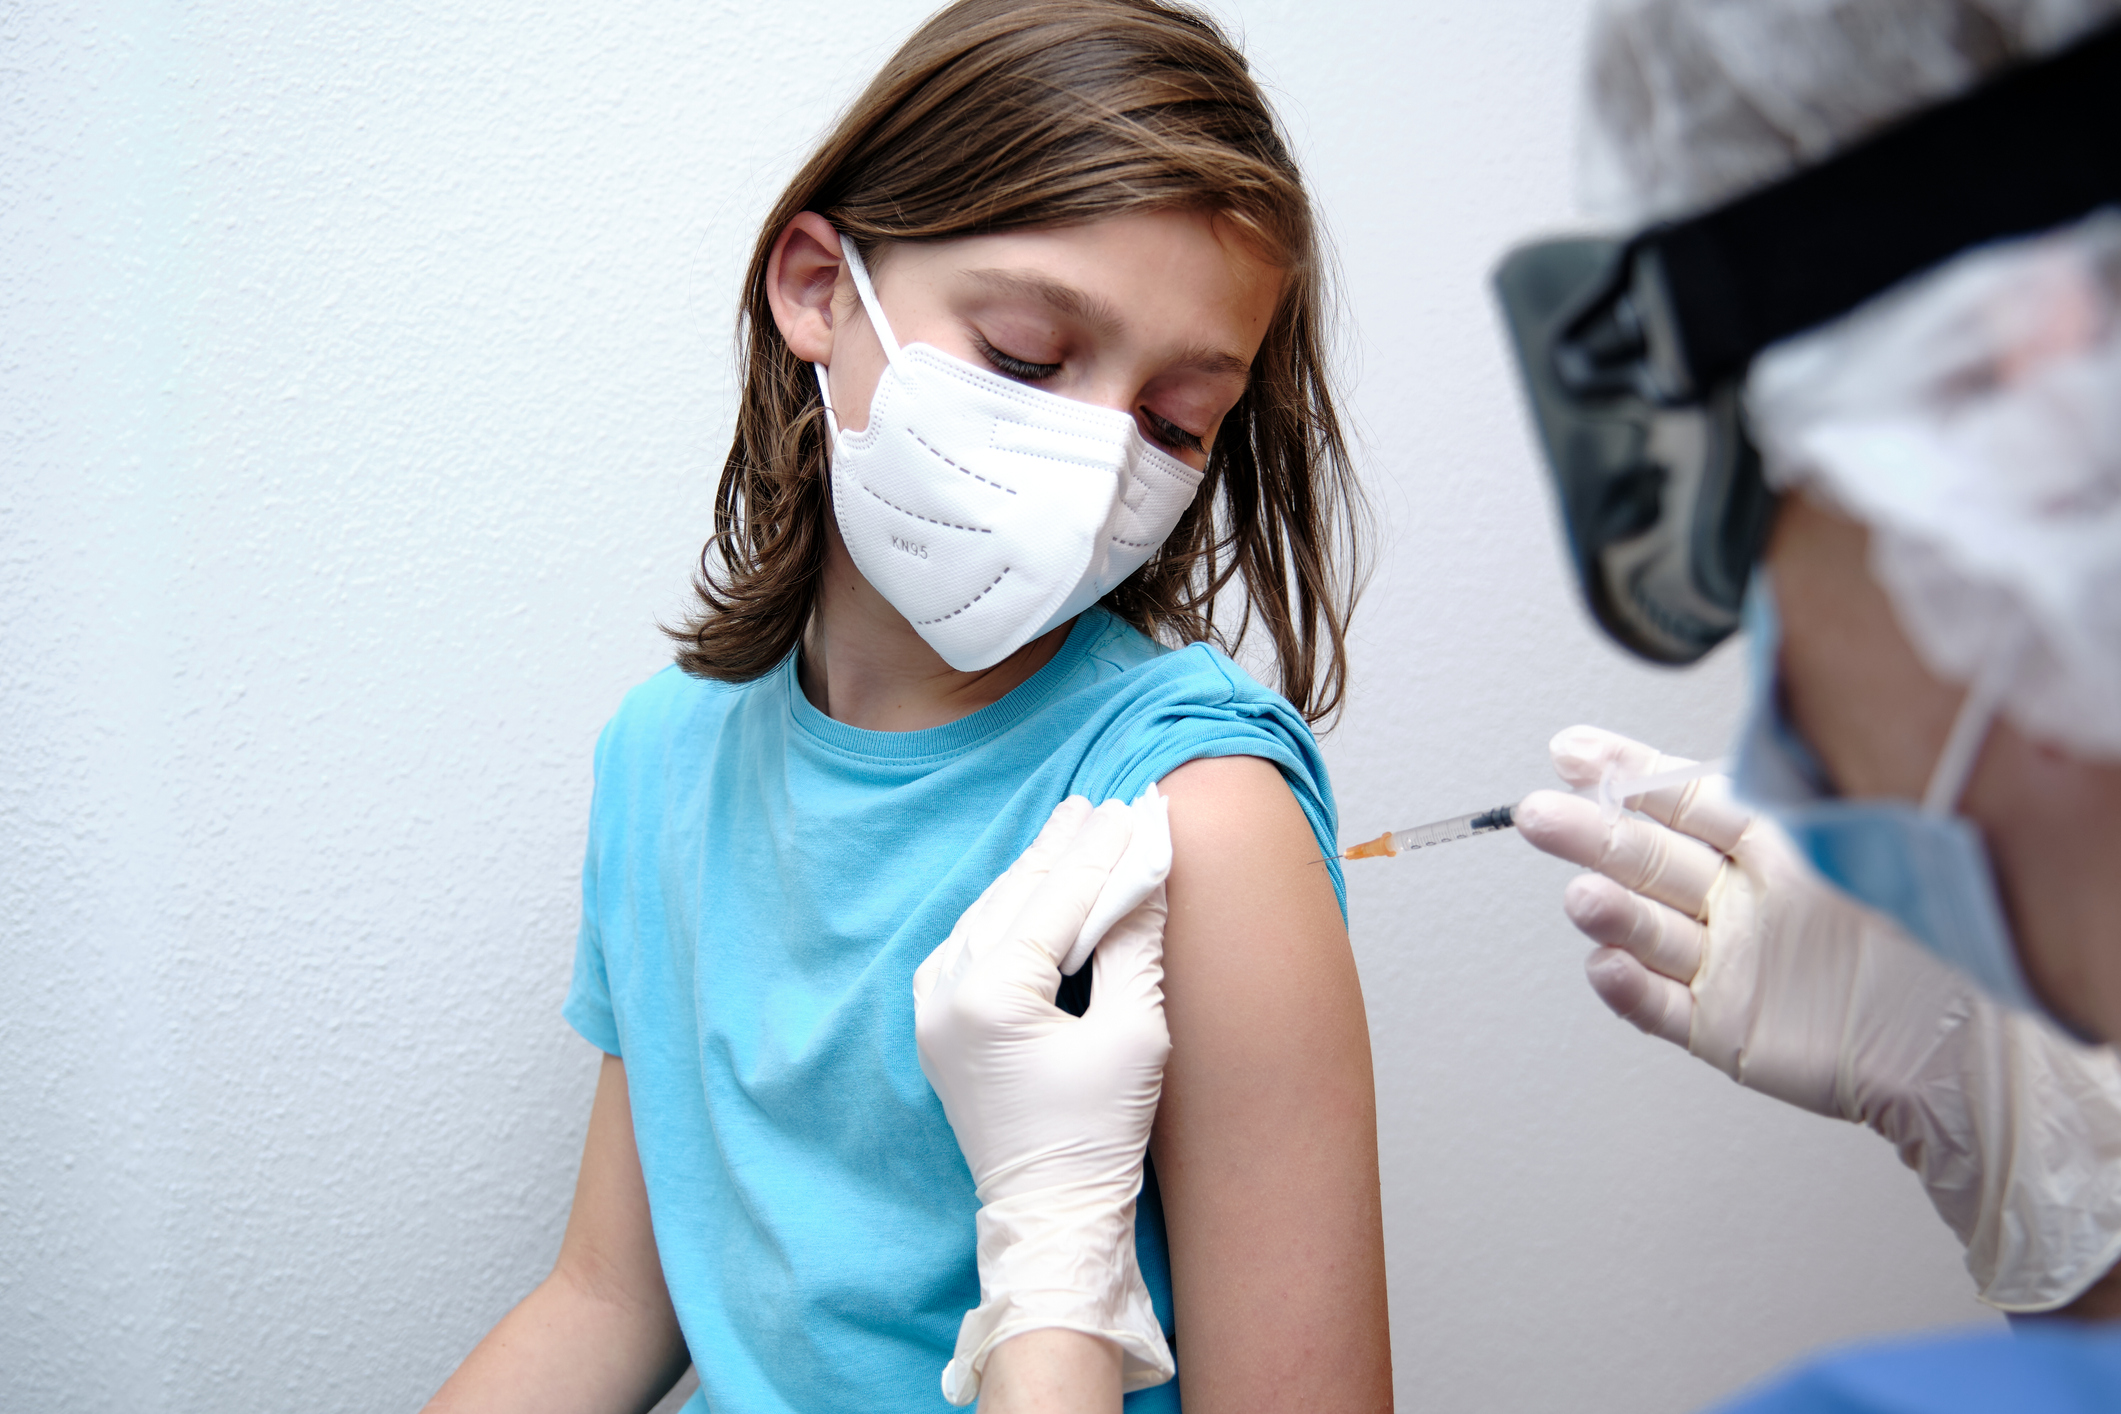 3 things you should know about the timeline for kids’ COVID vaccines